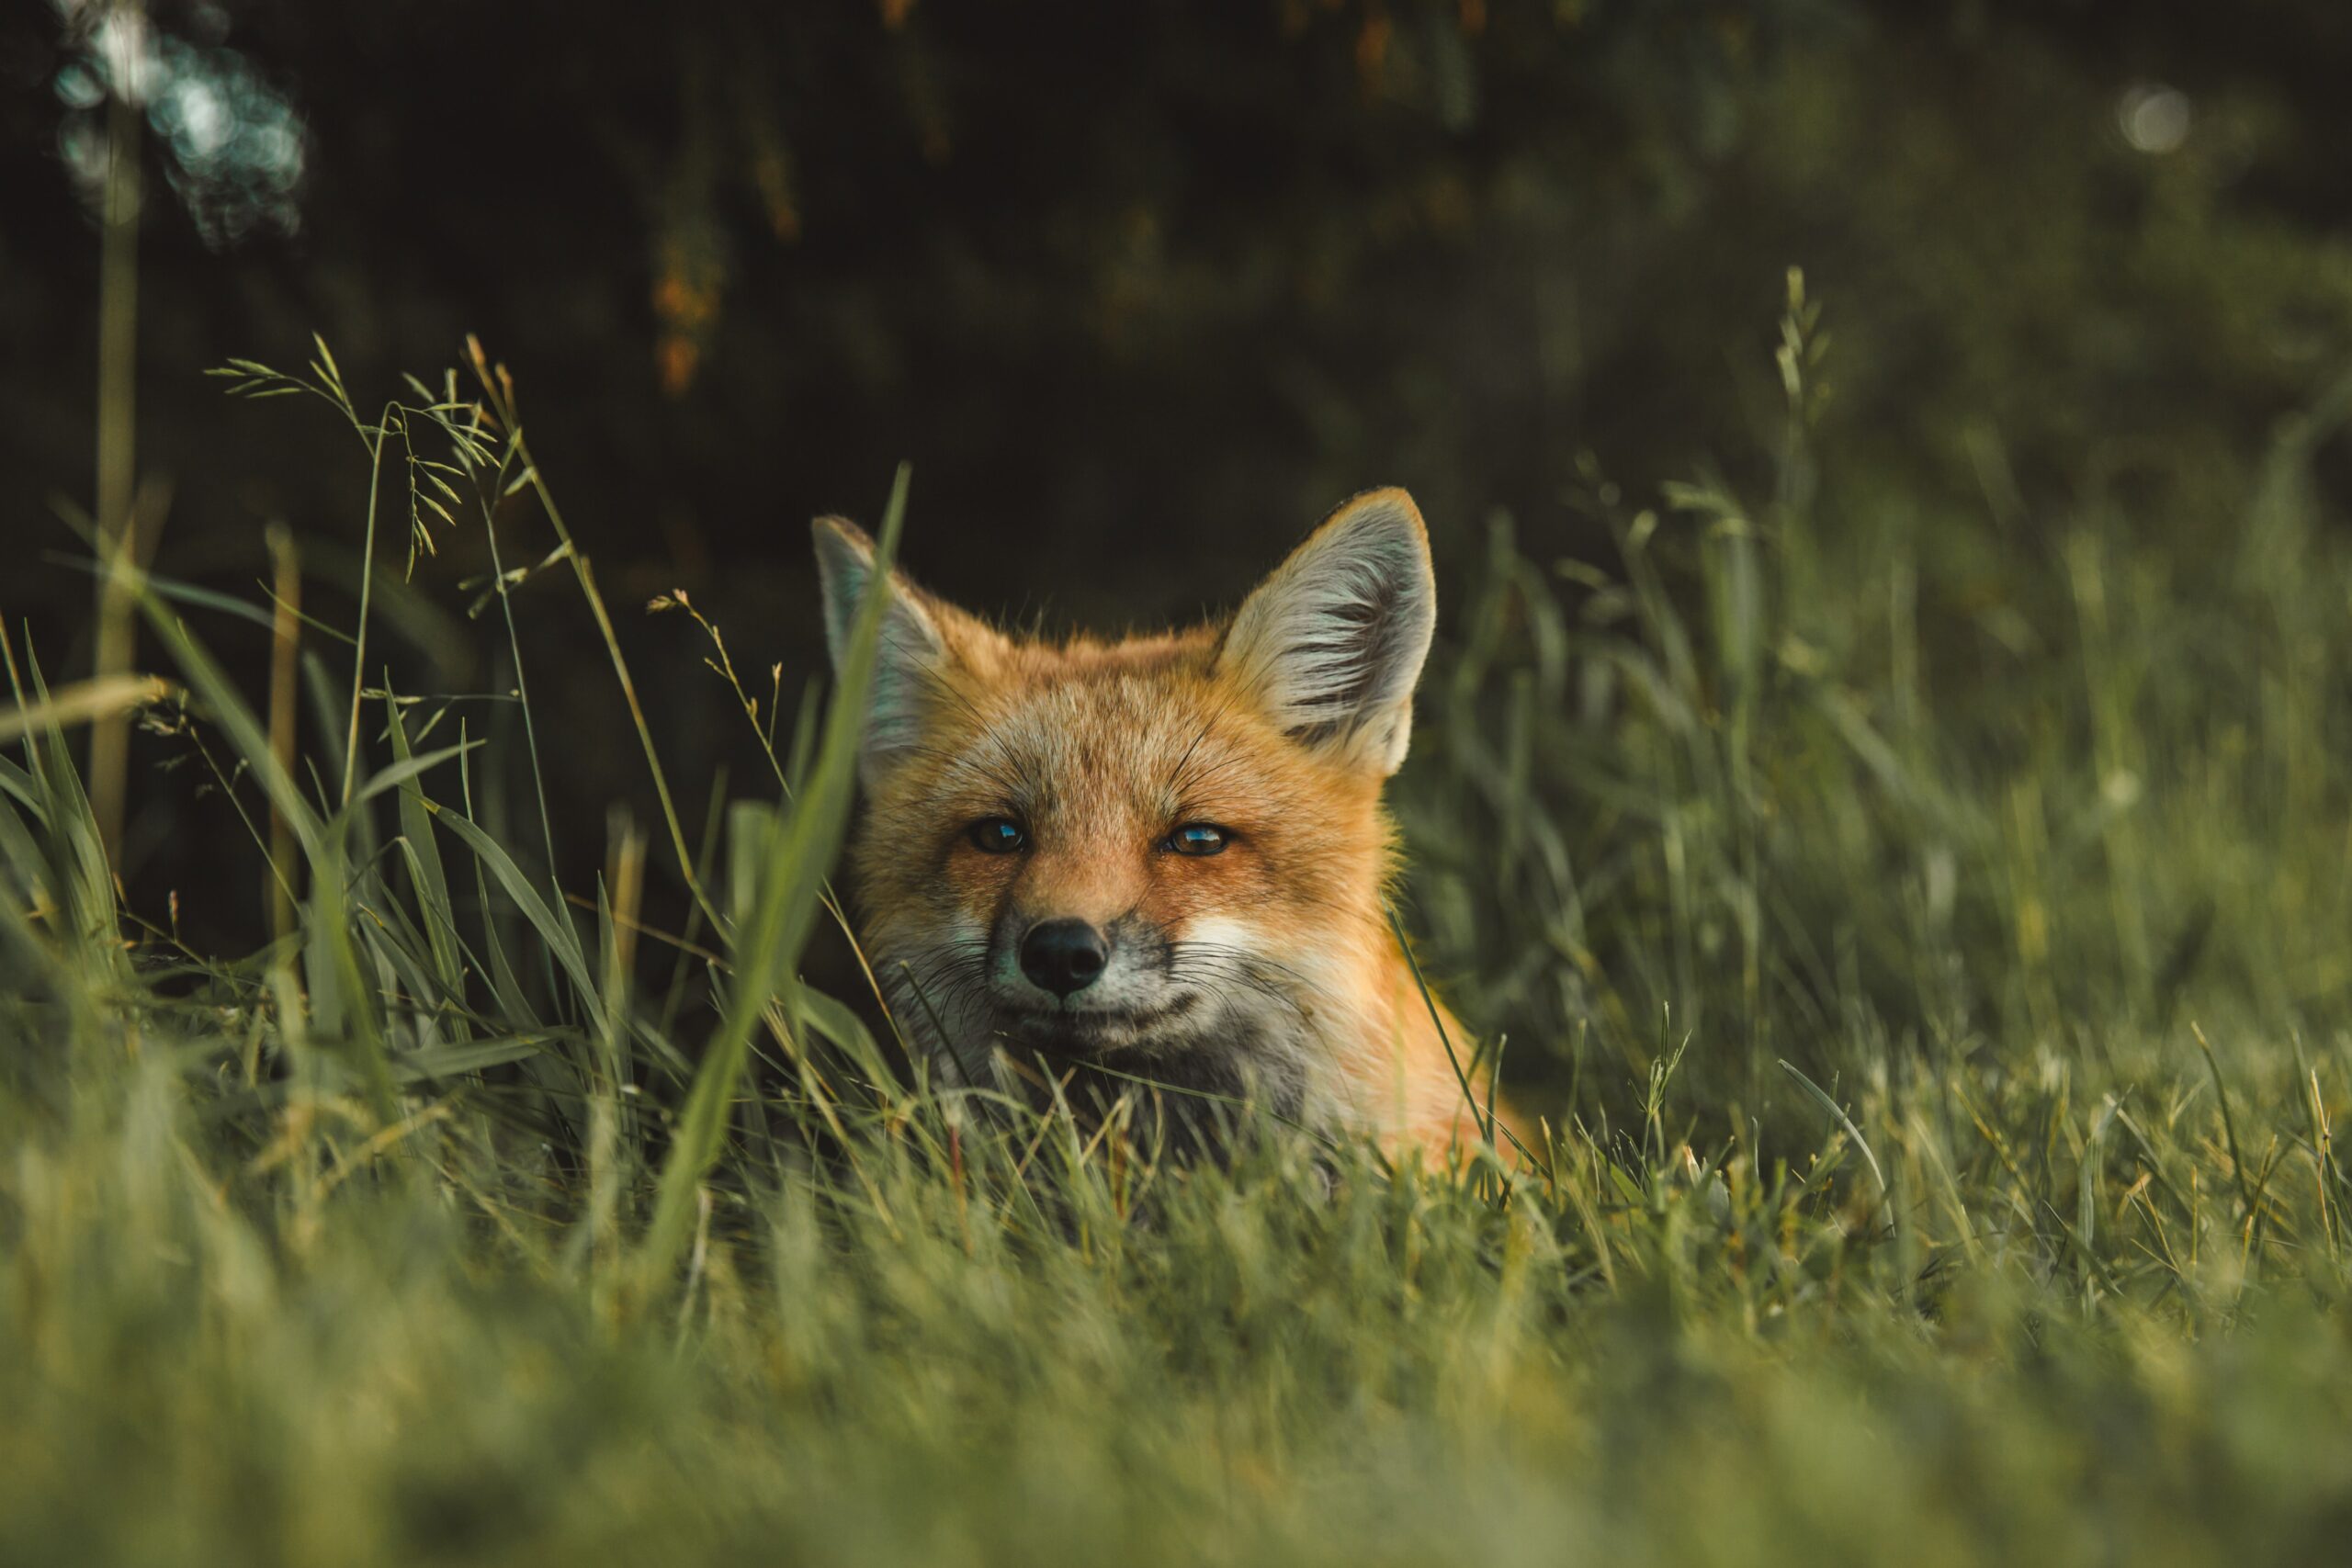 A fox sitting in some grass.